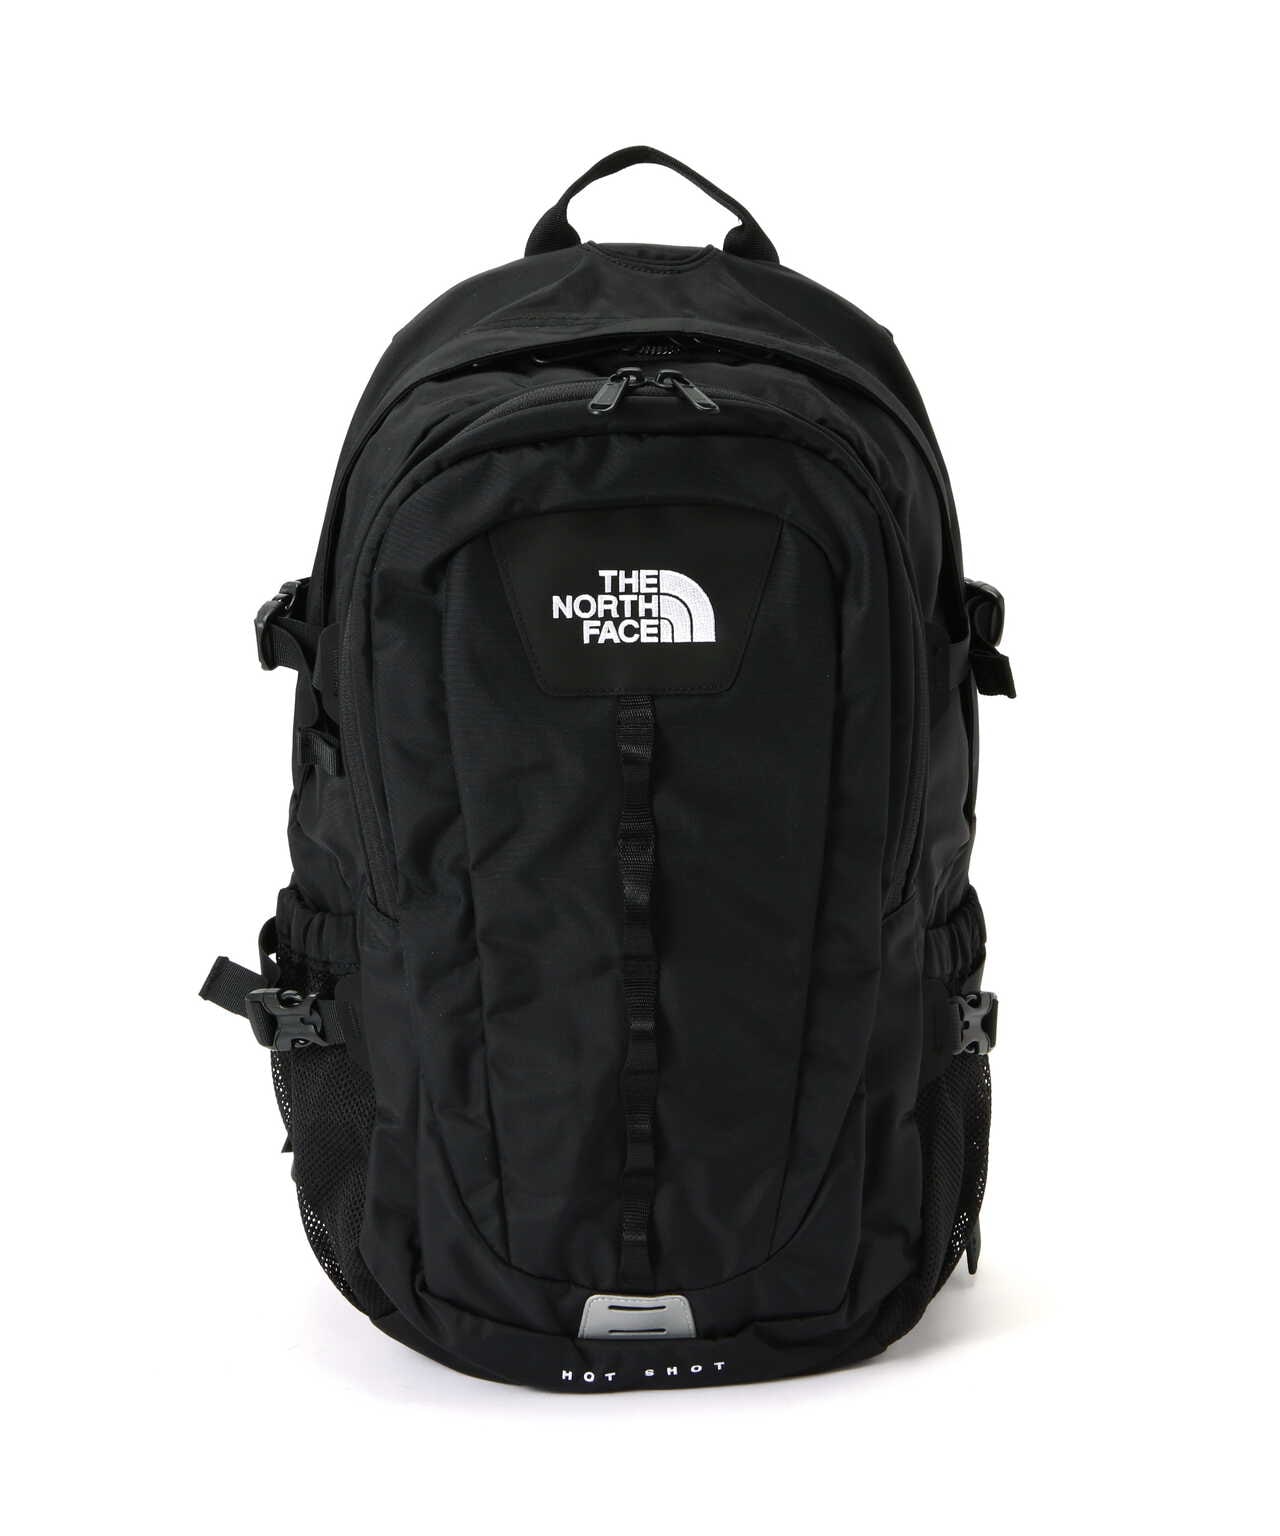 THE NORTH FACE 未使用品EXTRA SHOT NM72202